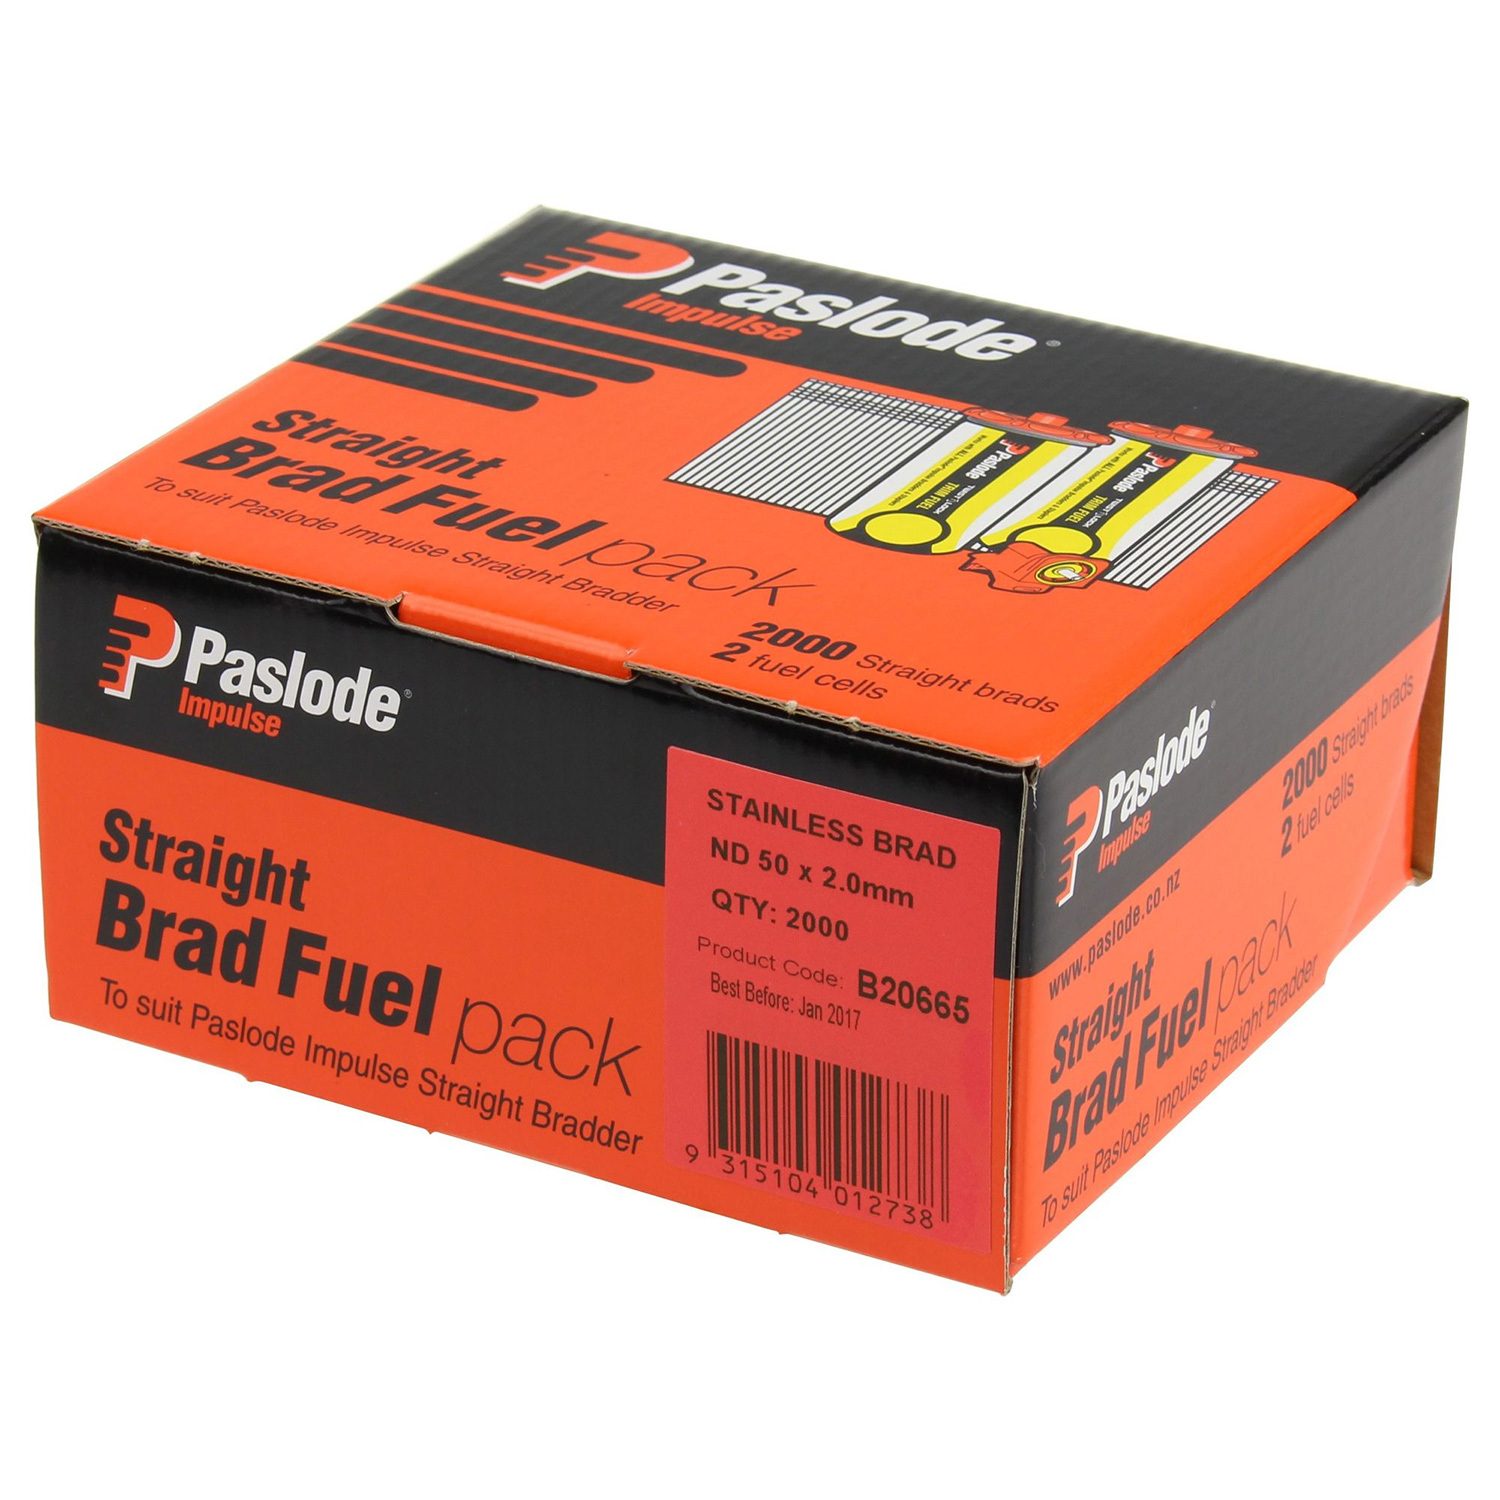 Paslode 50mm 14ga ND Series Stainless Steel Brads - 2 Fuel Cells (2000) B20665